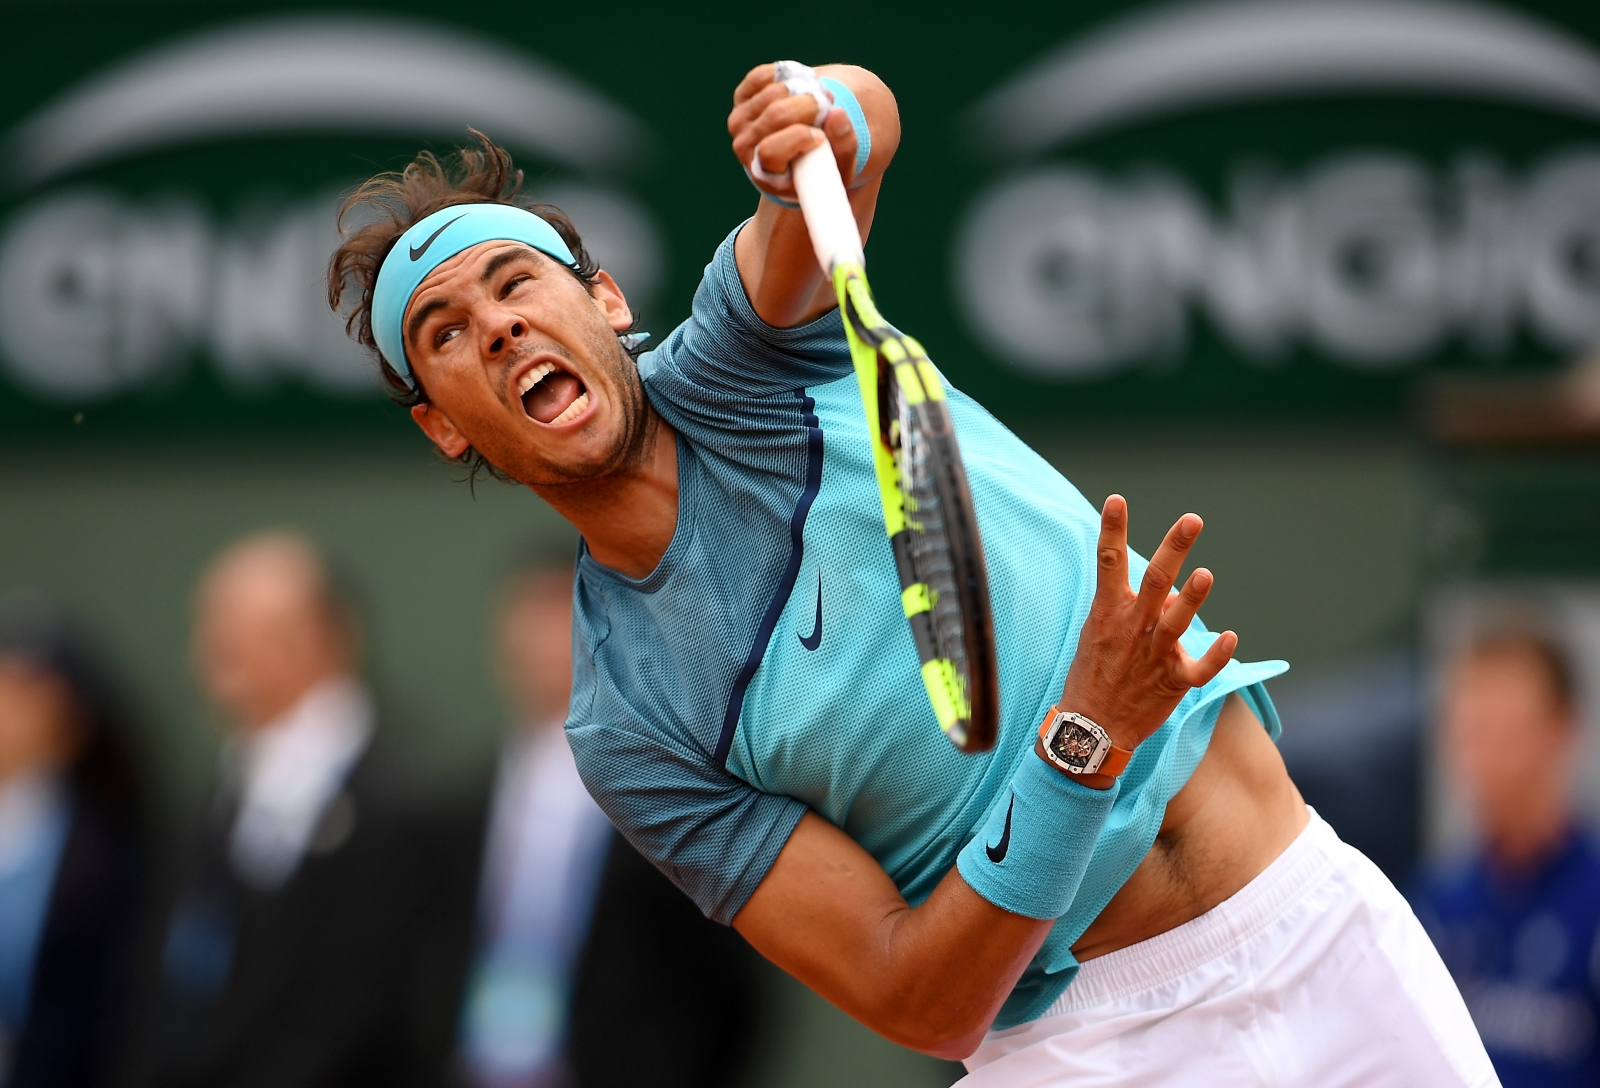 Rafael Nadal vs Andrey Kuznetsov, US Open 2016: Watch live, preview and betting odds